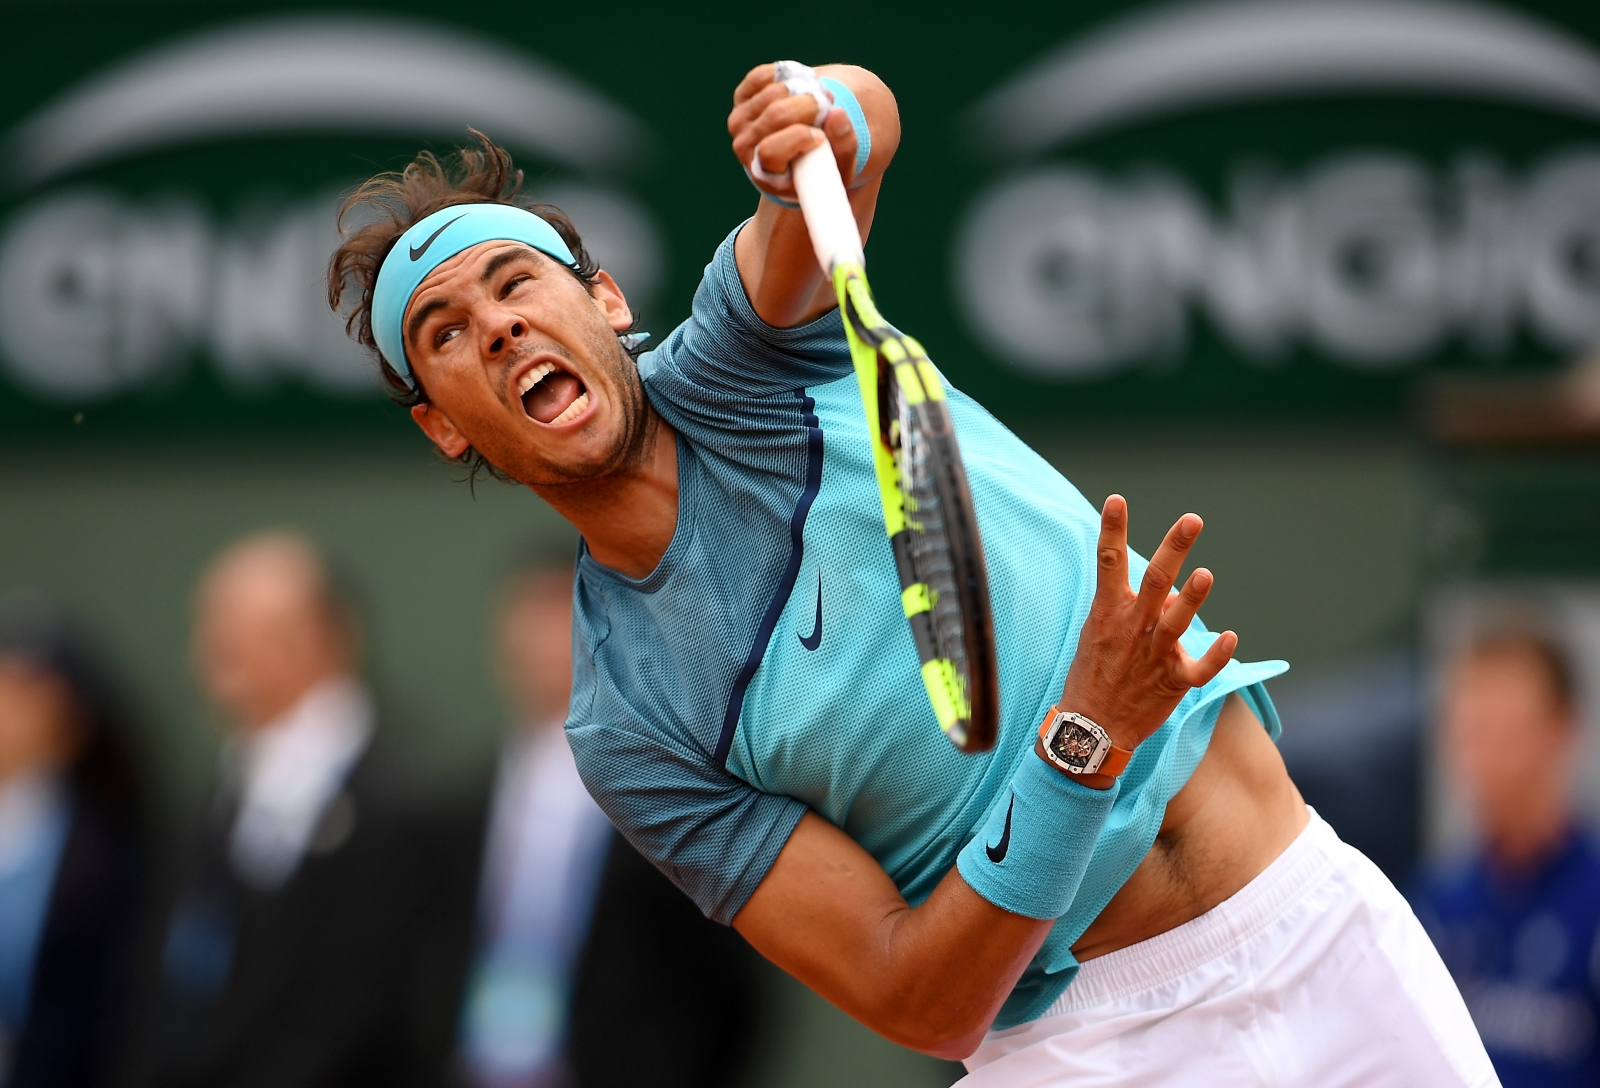 Rafael Nadal vs Andrey Kuznetsov, US Open 2016: Watch live, preview and betting odds